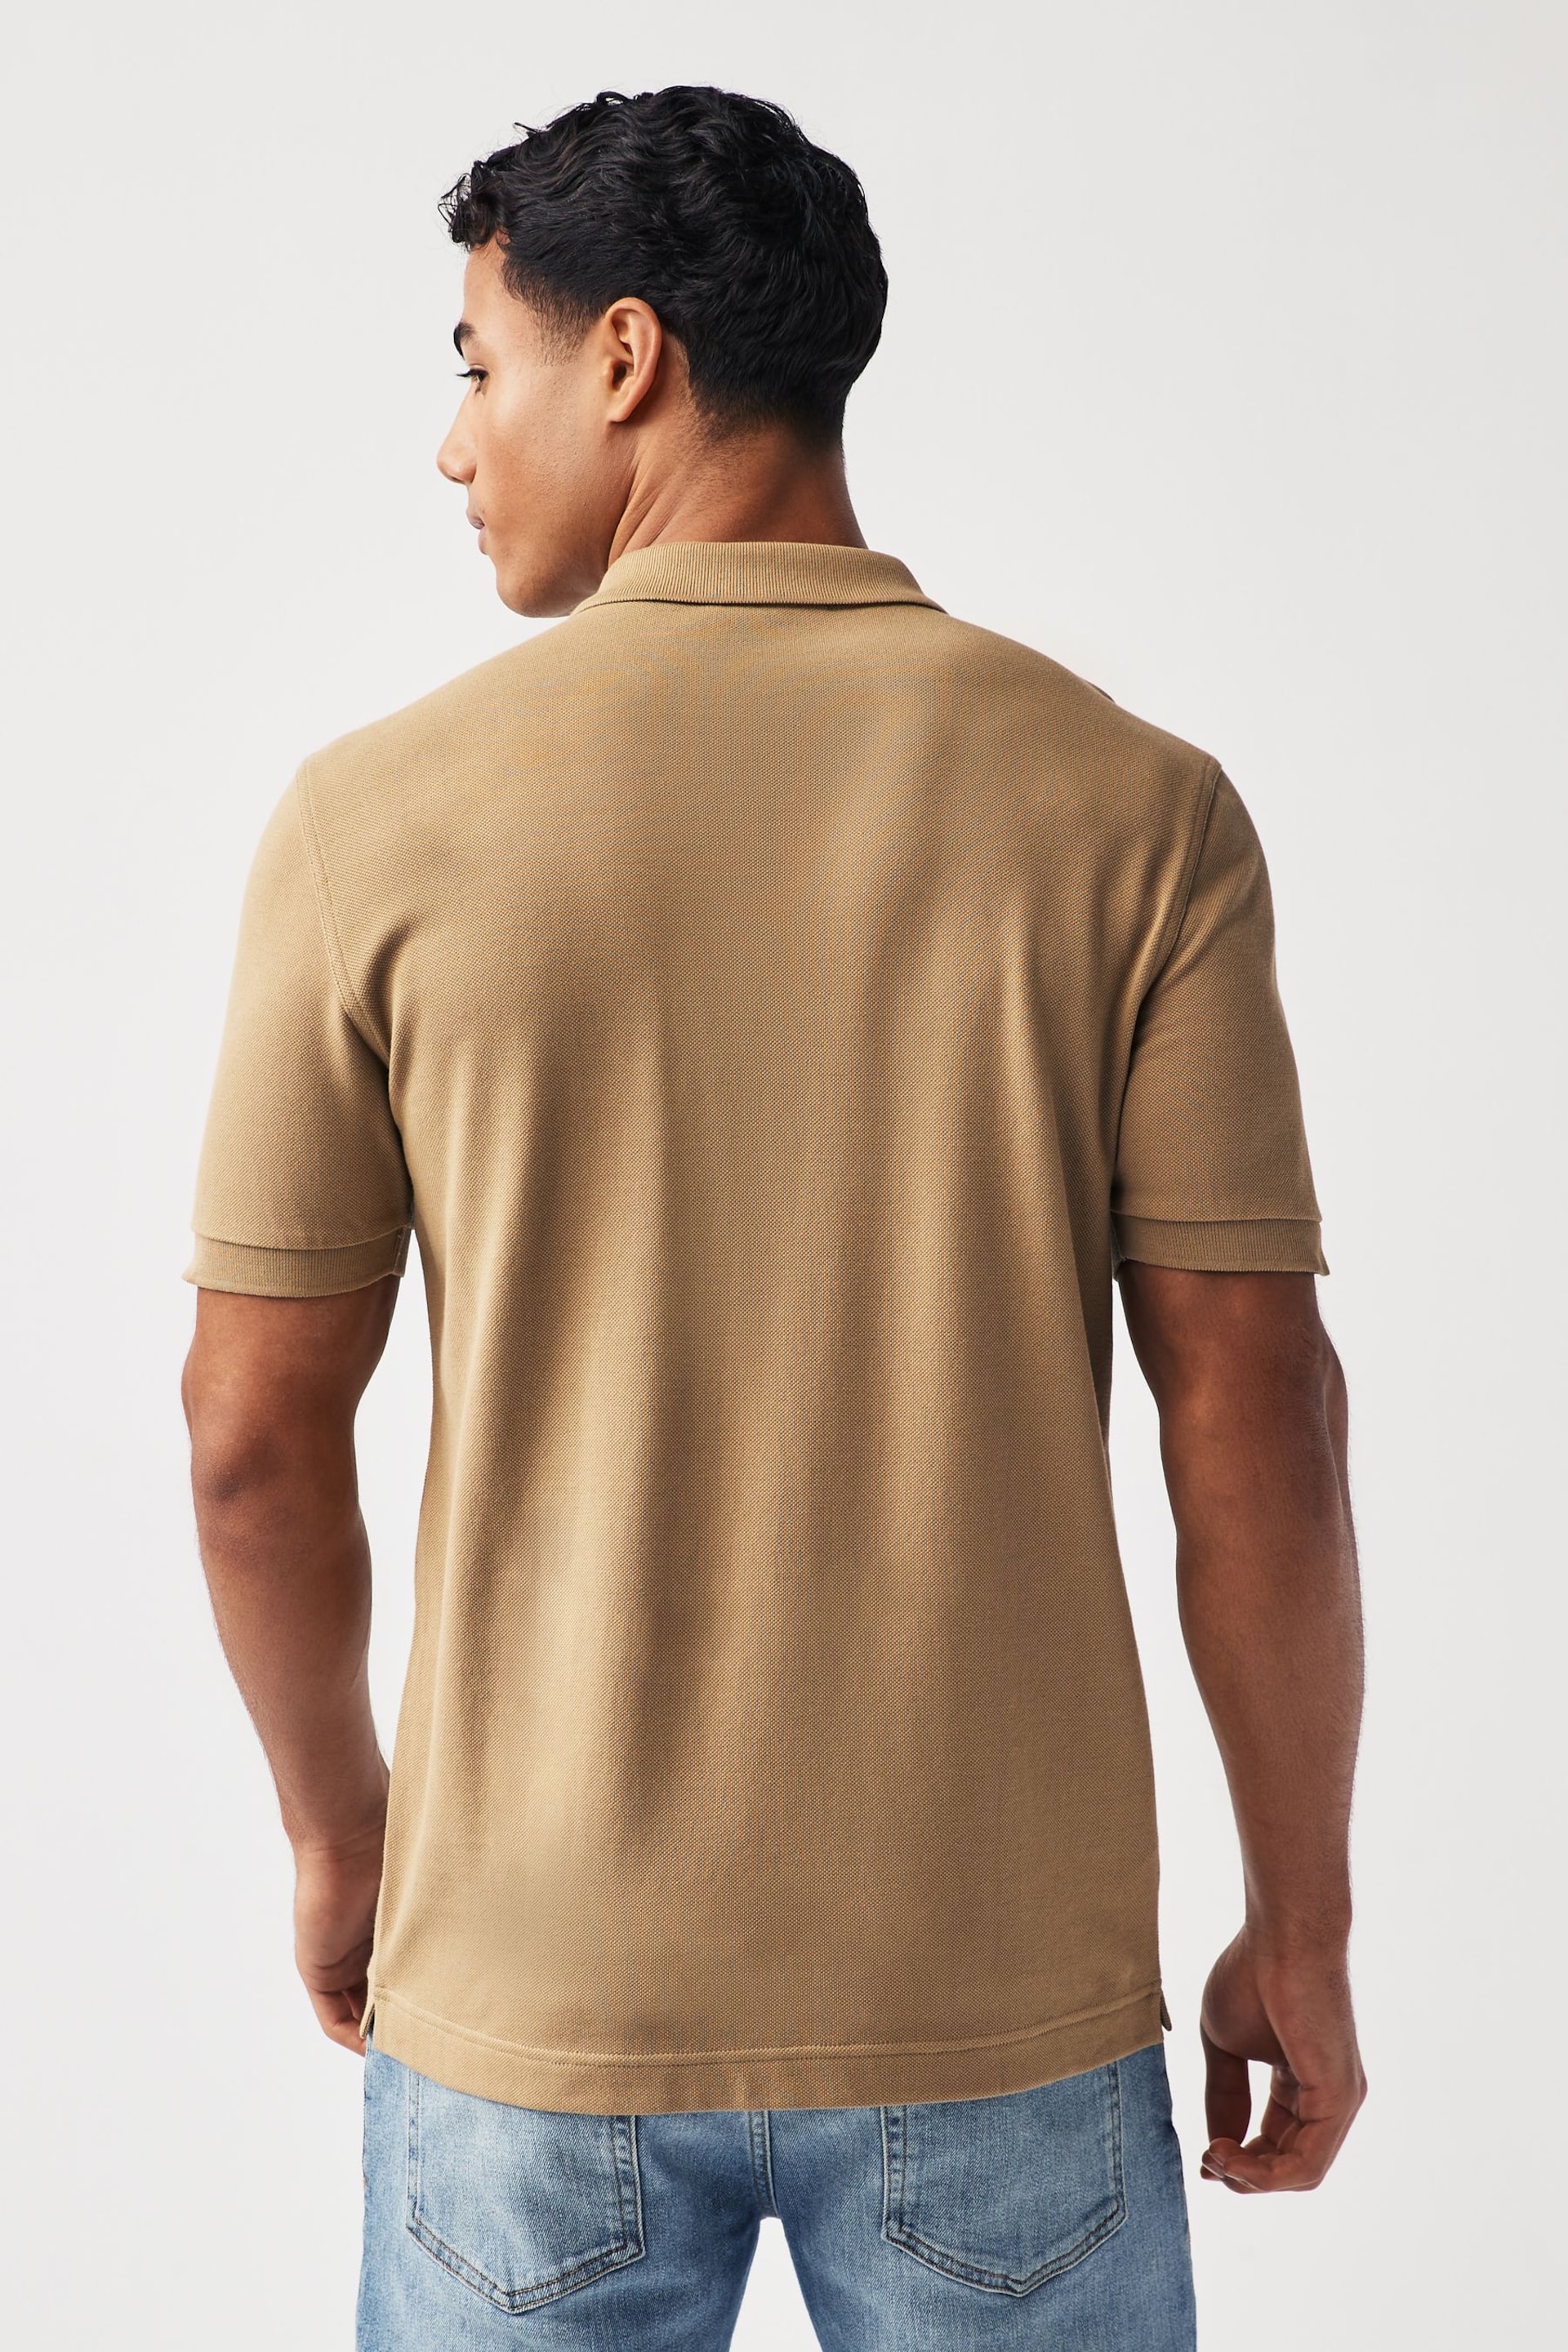 Fred Perry Stone Zip Neck Polo Shirt - Image 2 of 5